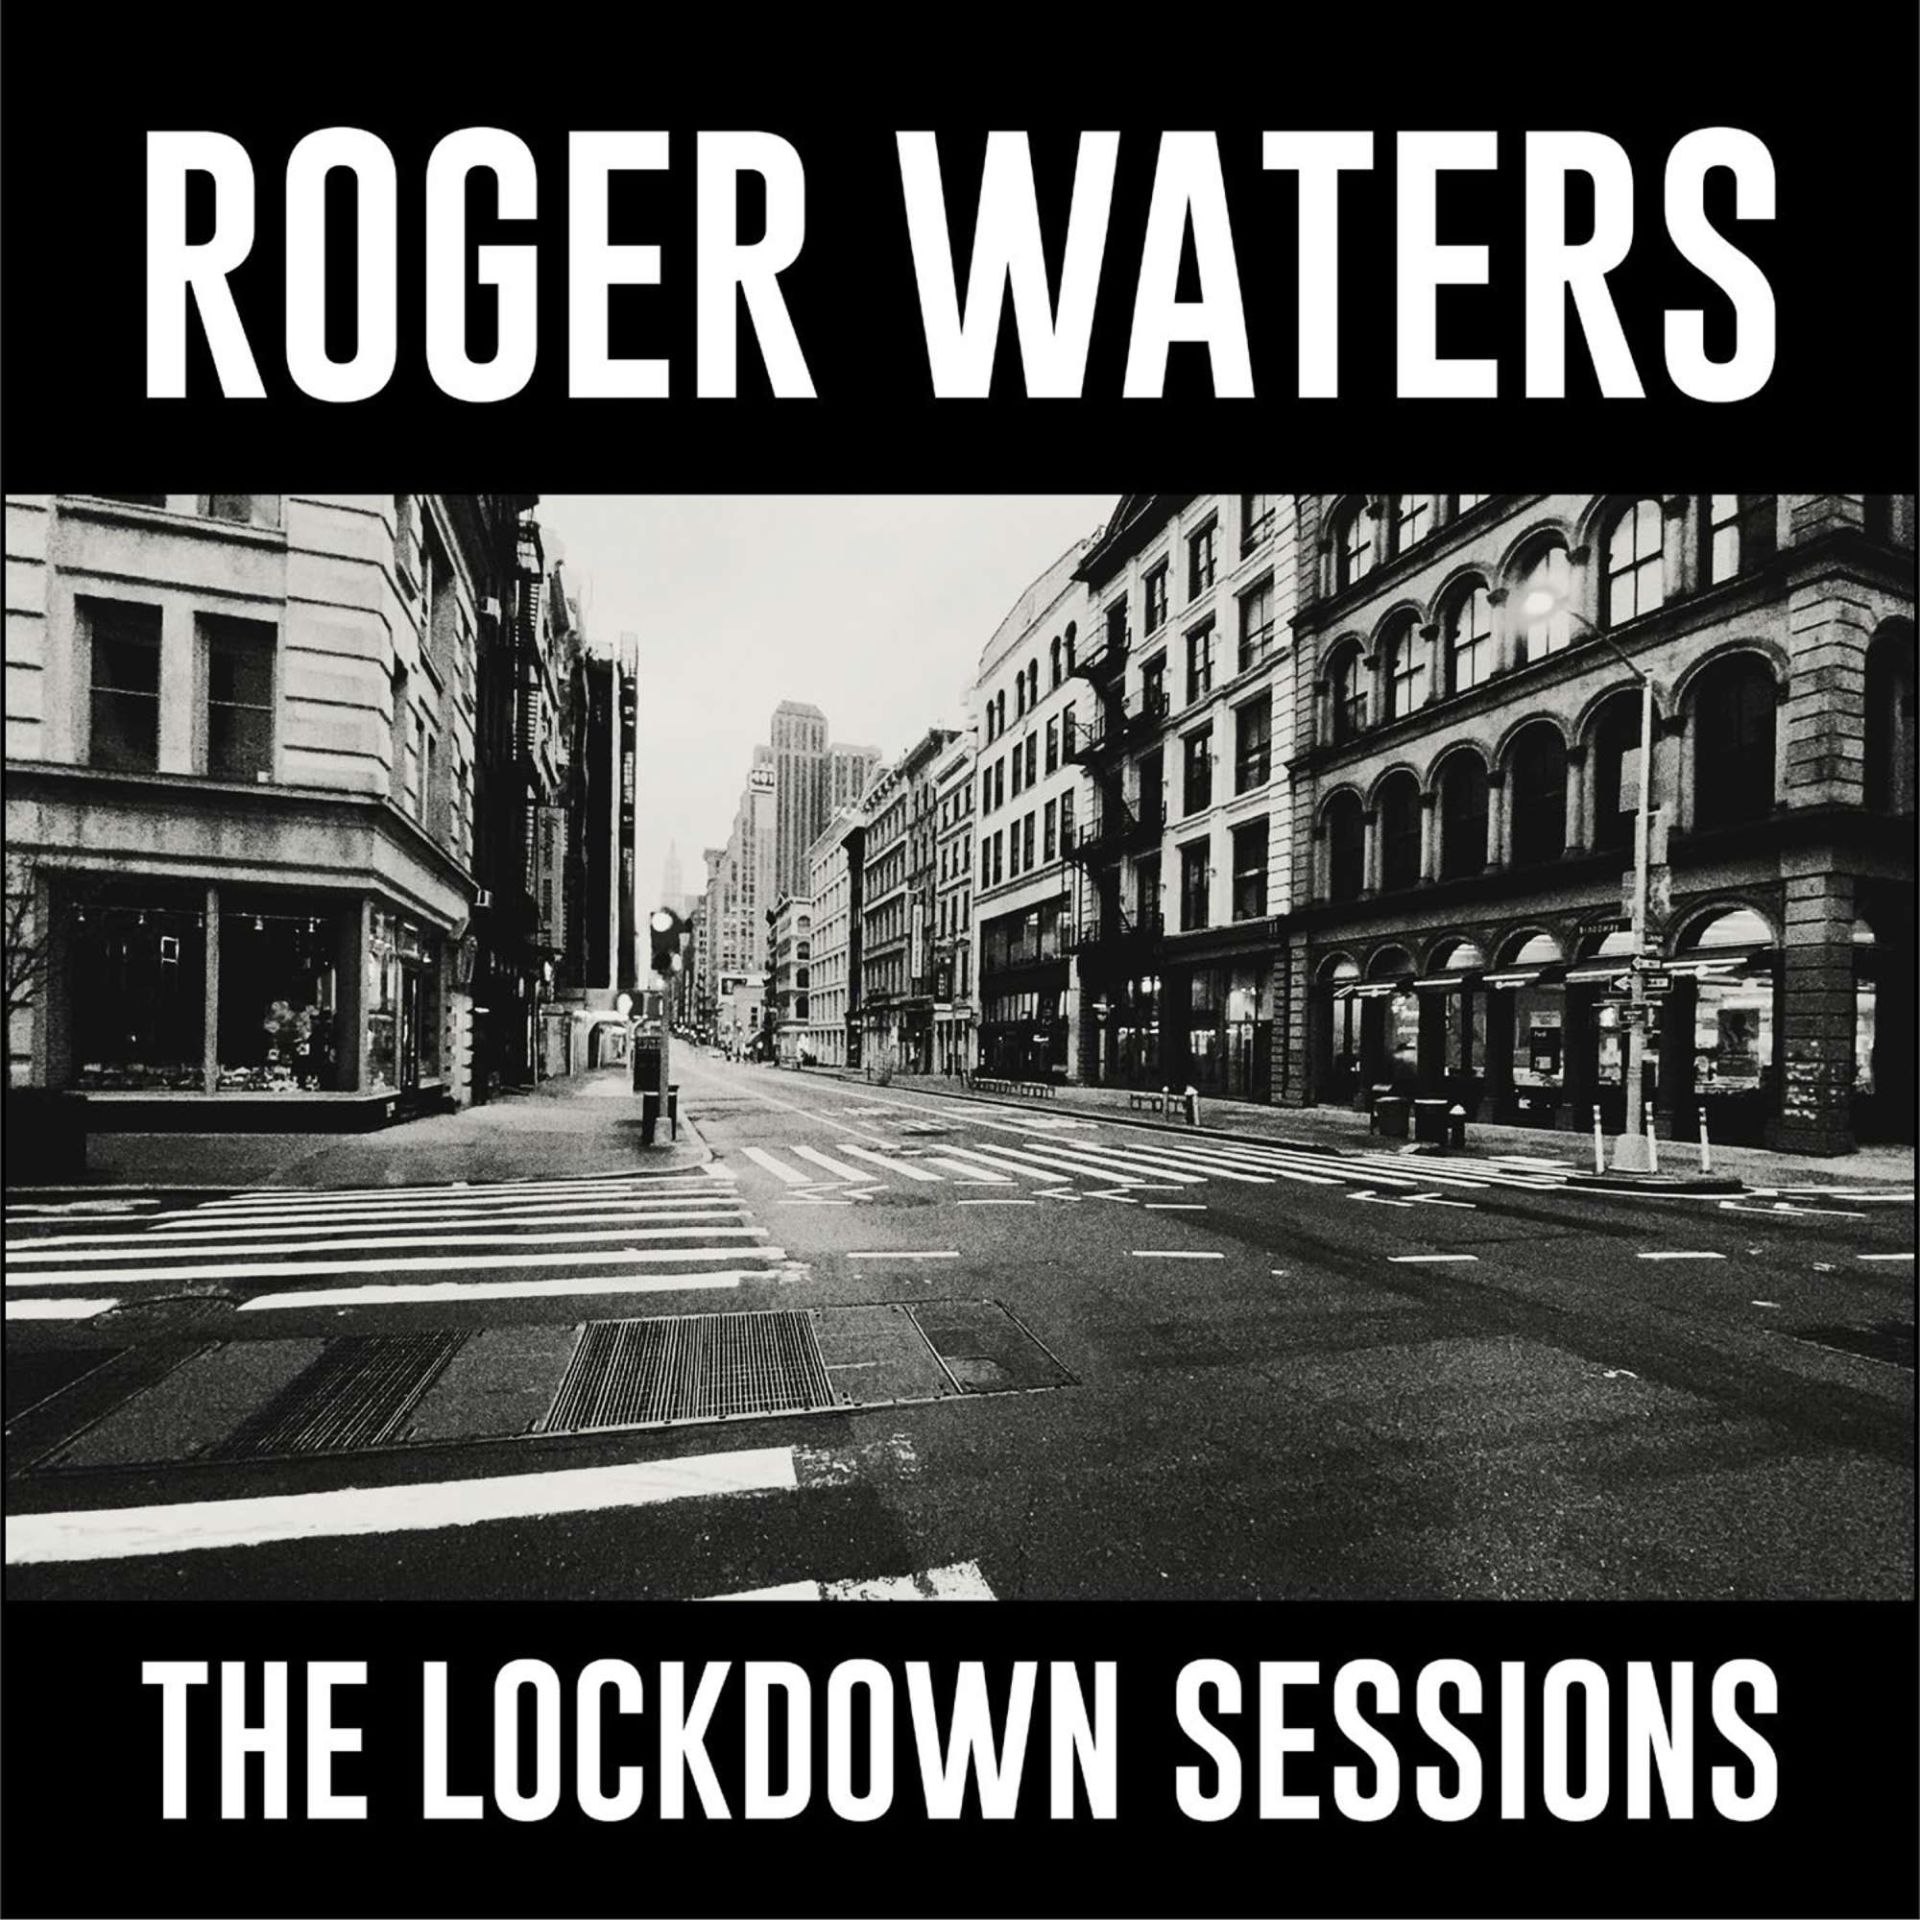 Roger Waters The Lockdown Session LP